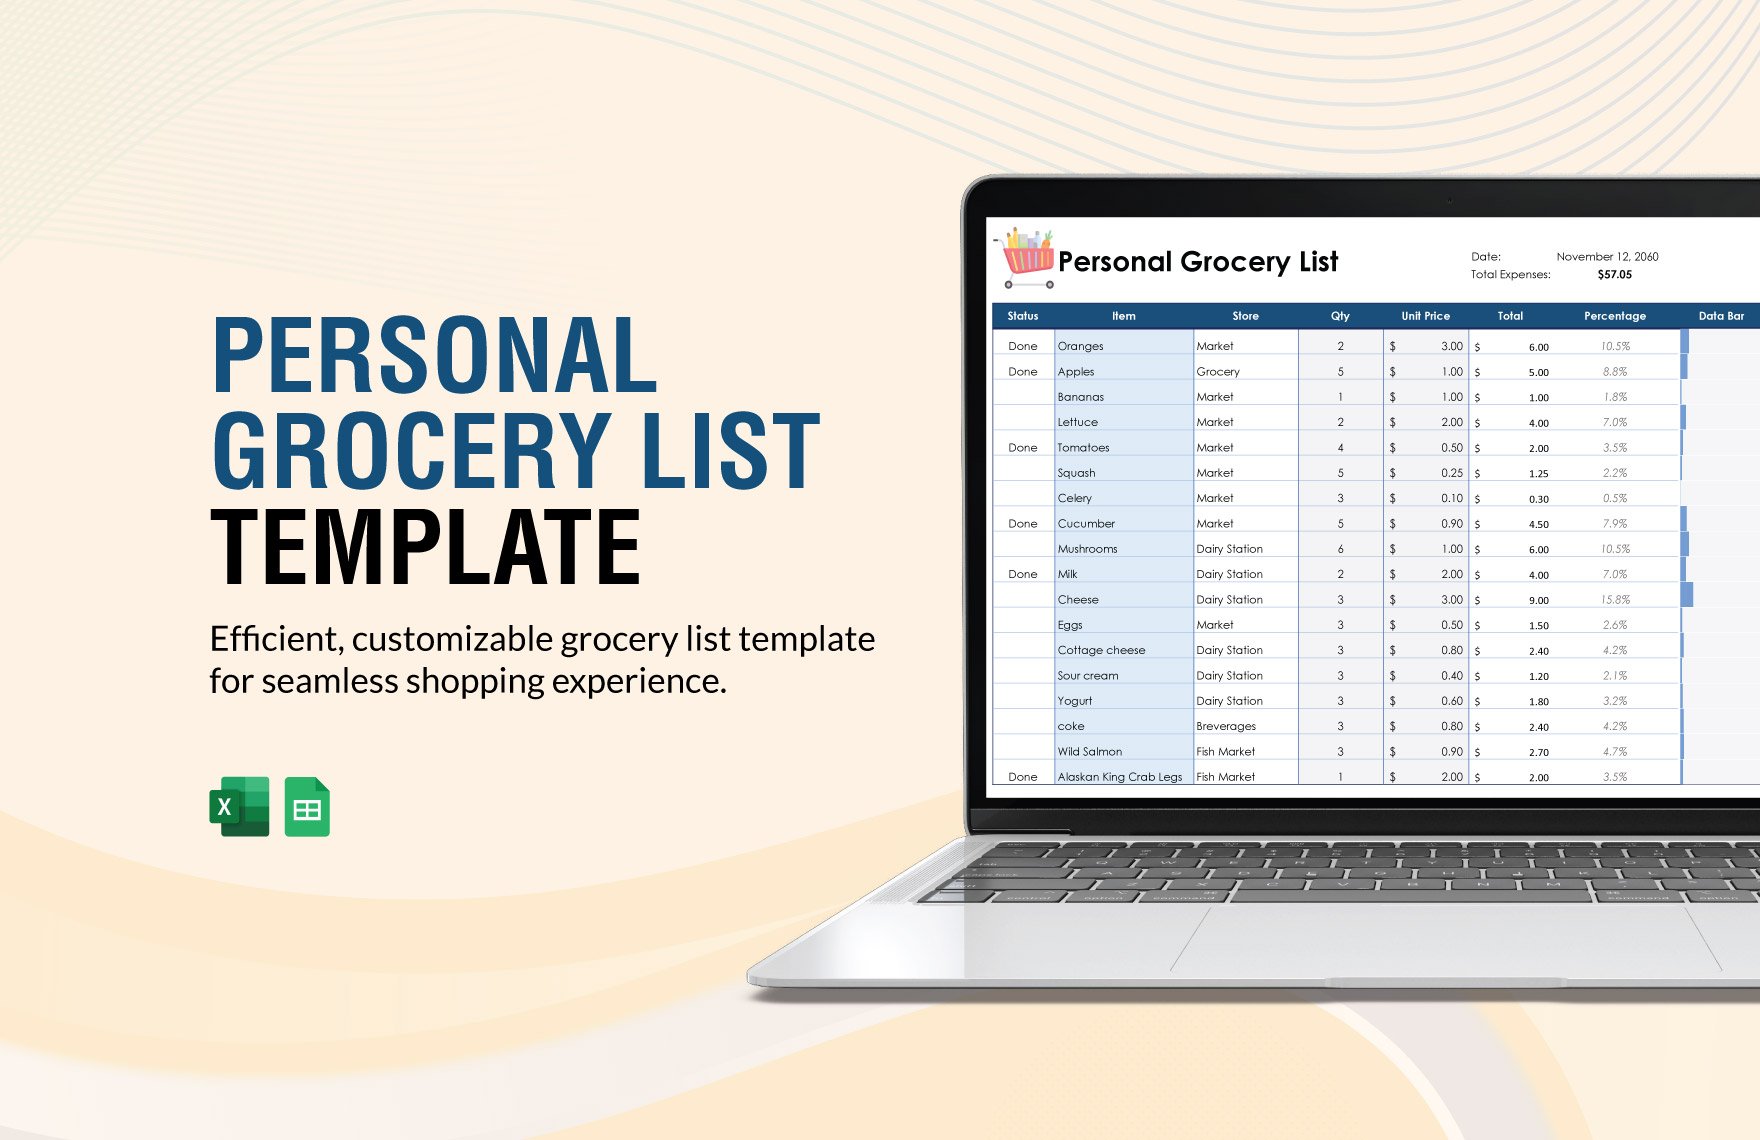 Personal Grocery List in Excel, Google Sheets